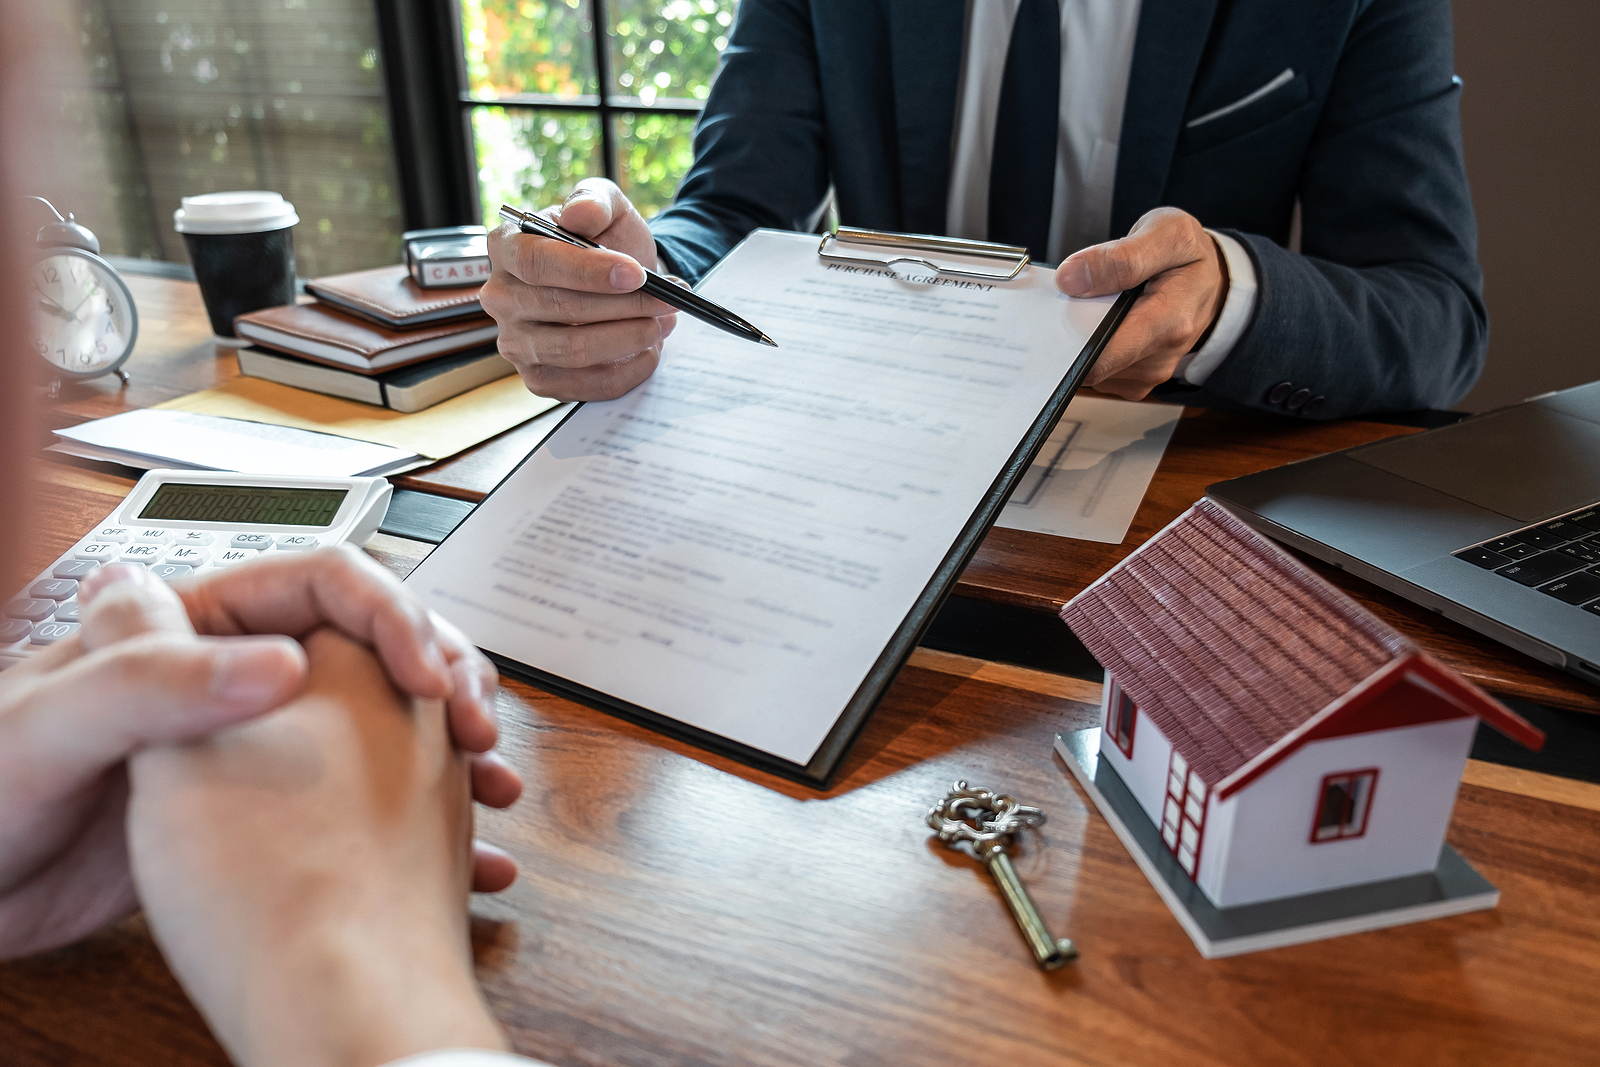 Sale purchase contract to buy a house, Customer sending money buying home loan and giving keys from Agent after signing contract to buy house with approved form